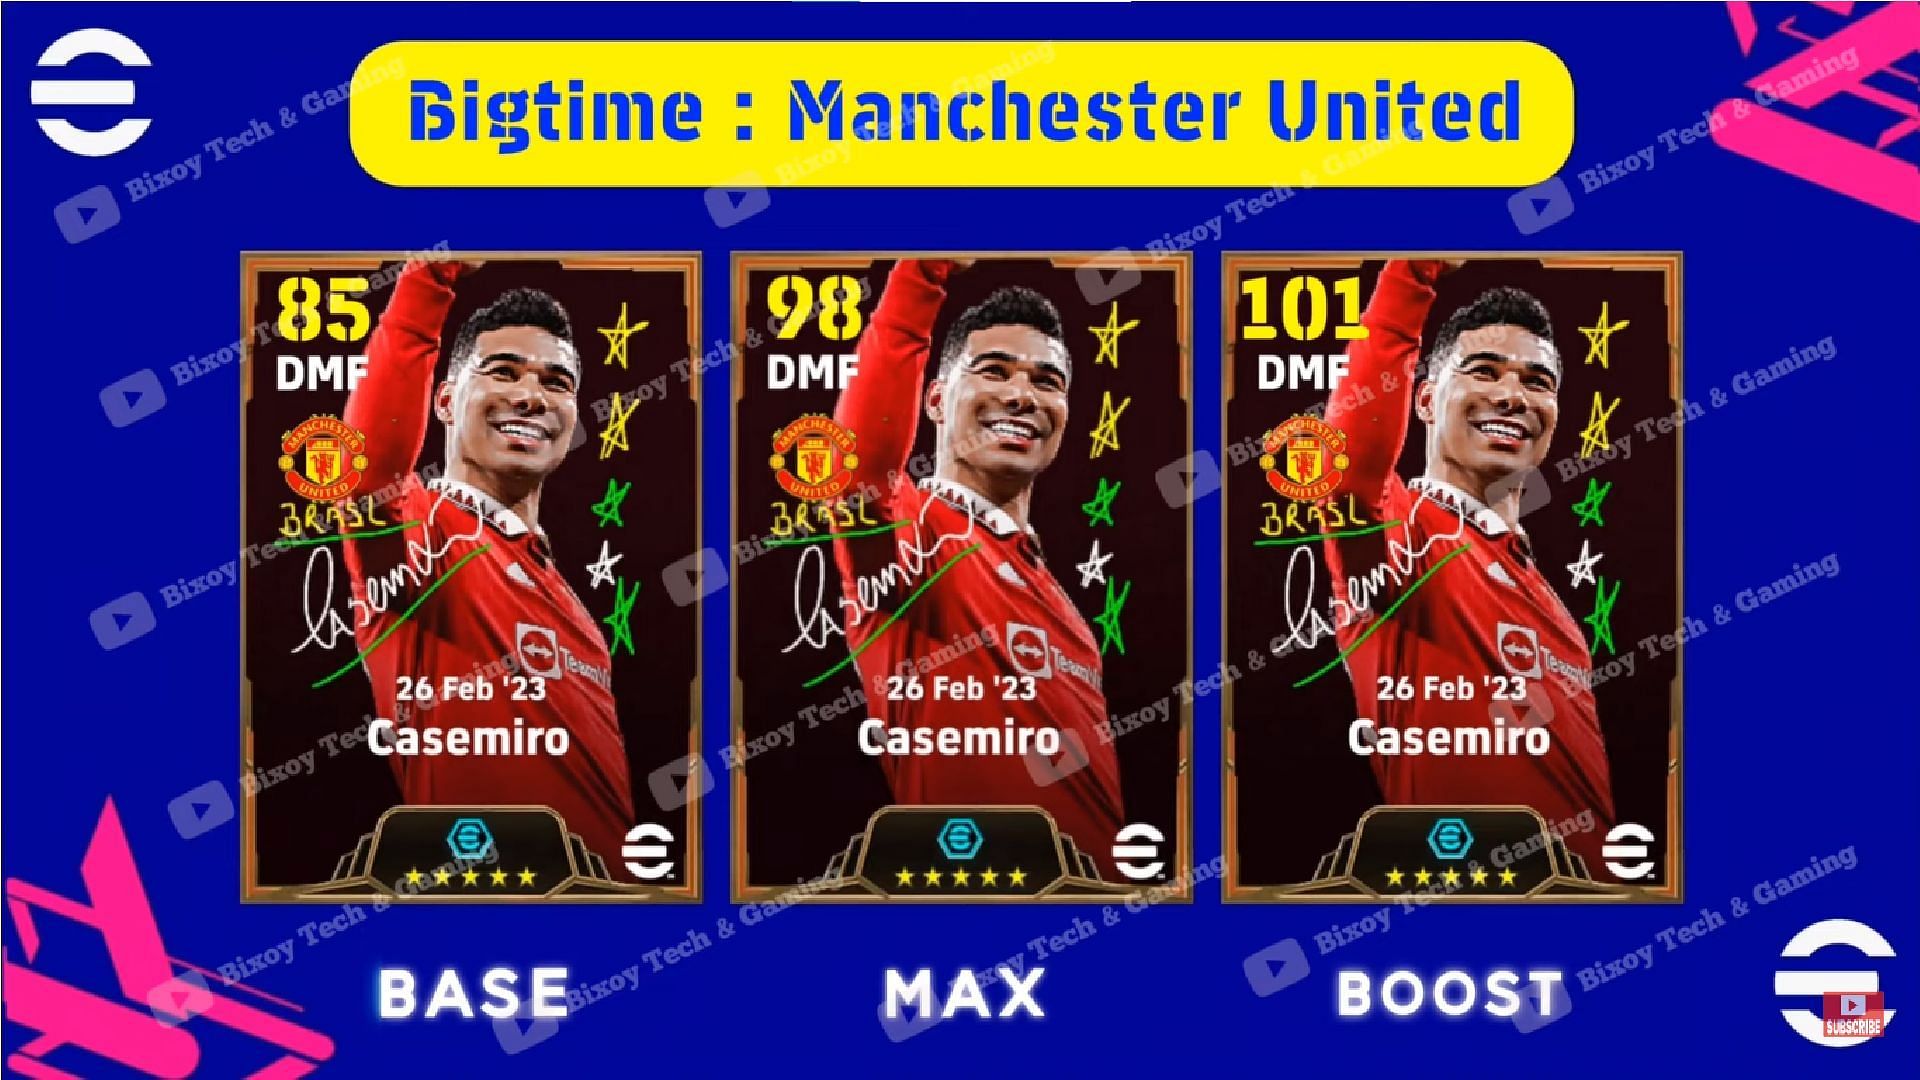 Leak suggests the Big Time Casemiro card in the rumored Manchester United pack (Image via Bixoy Tech &amp; Gaming)